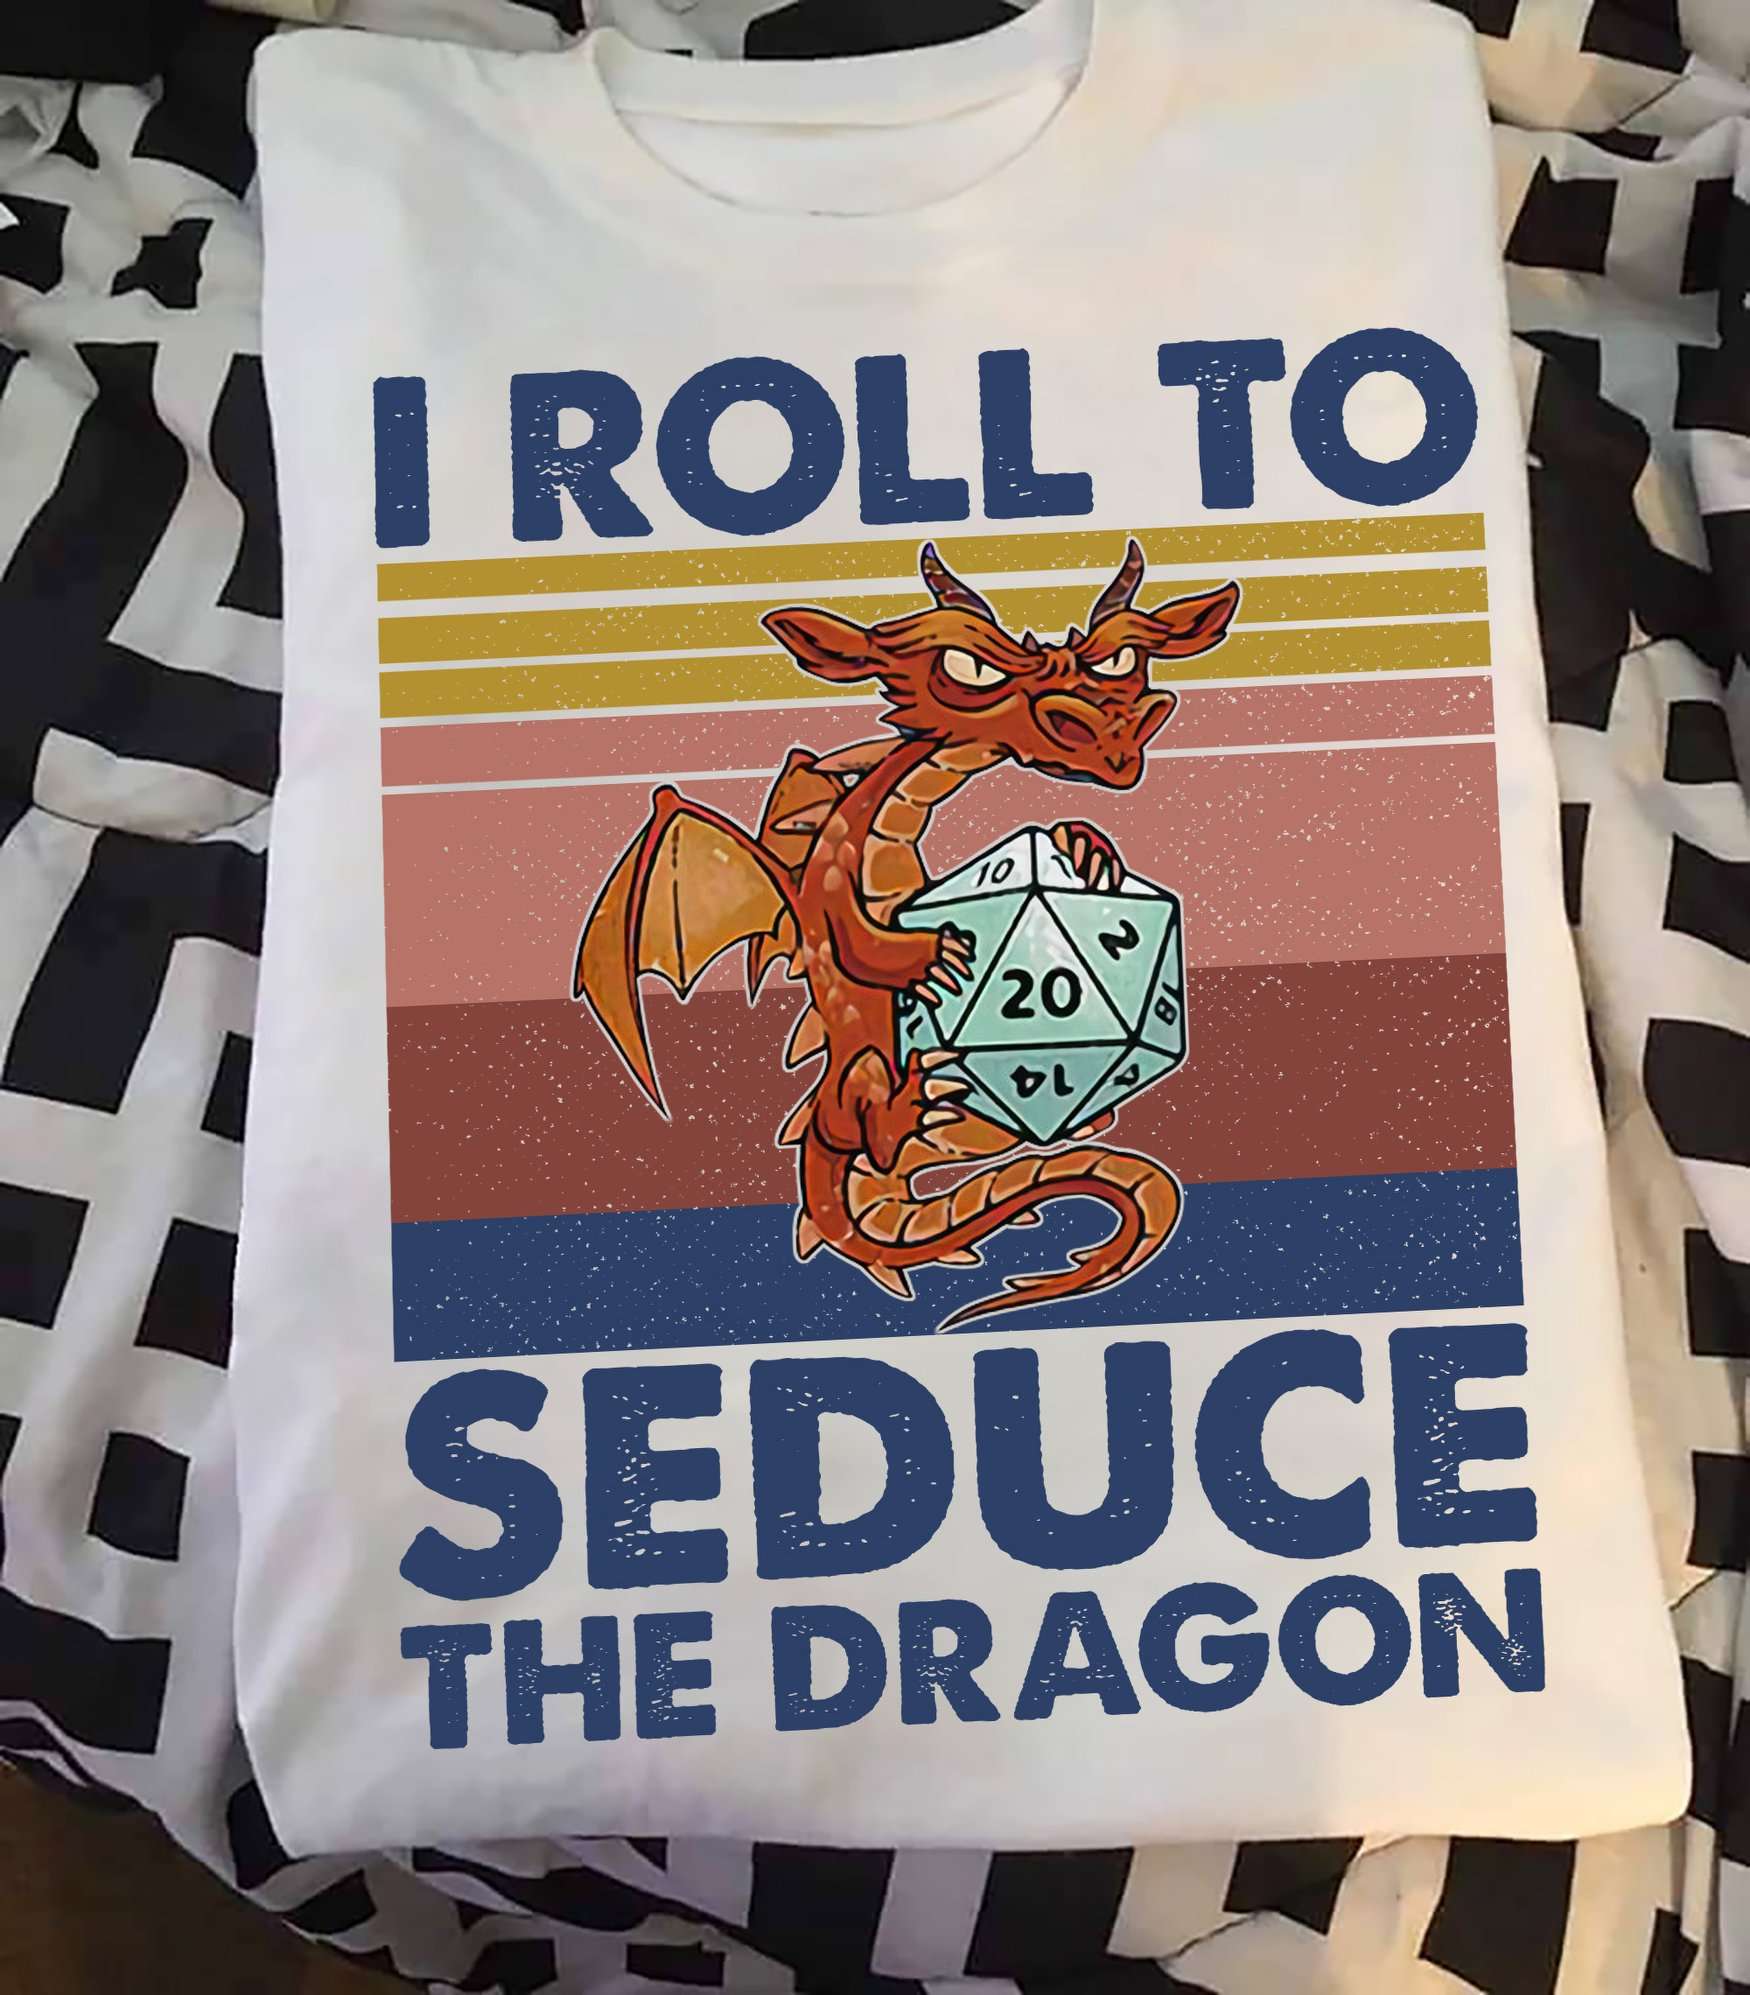 I roll to seduce the dragon - Roll initiative, dragon rolling dice d&d